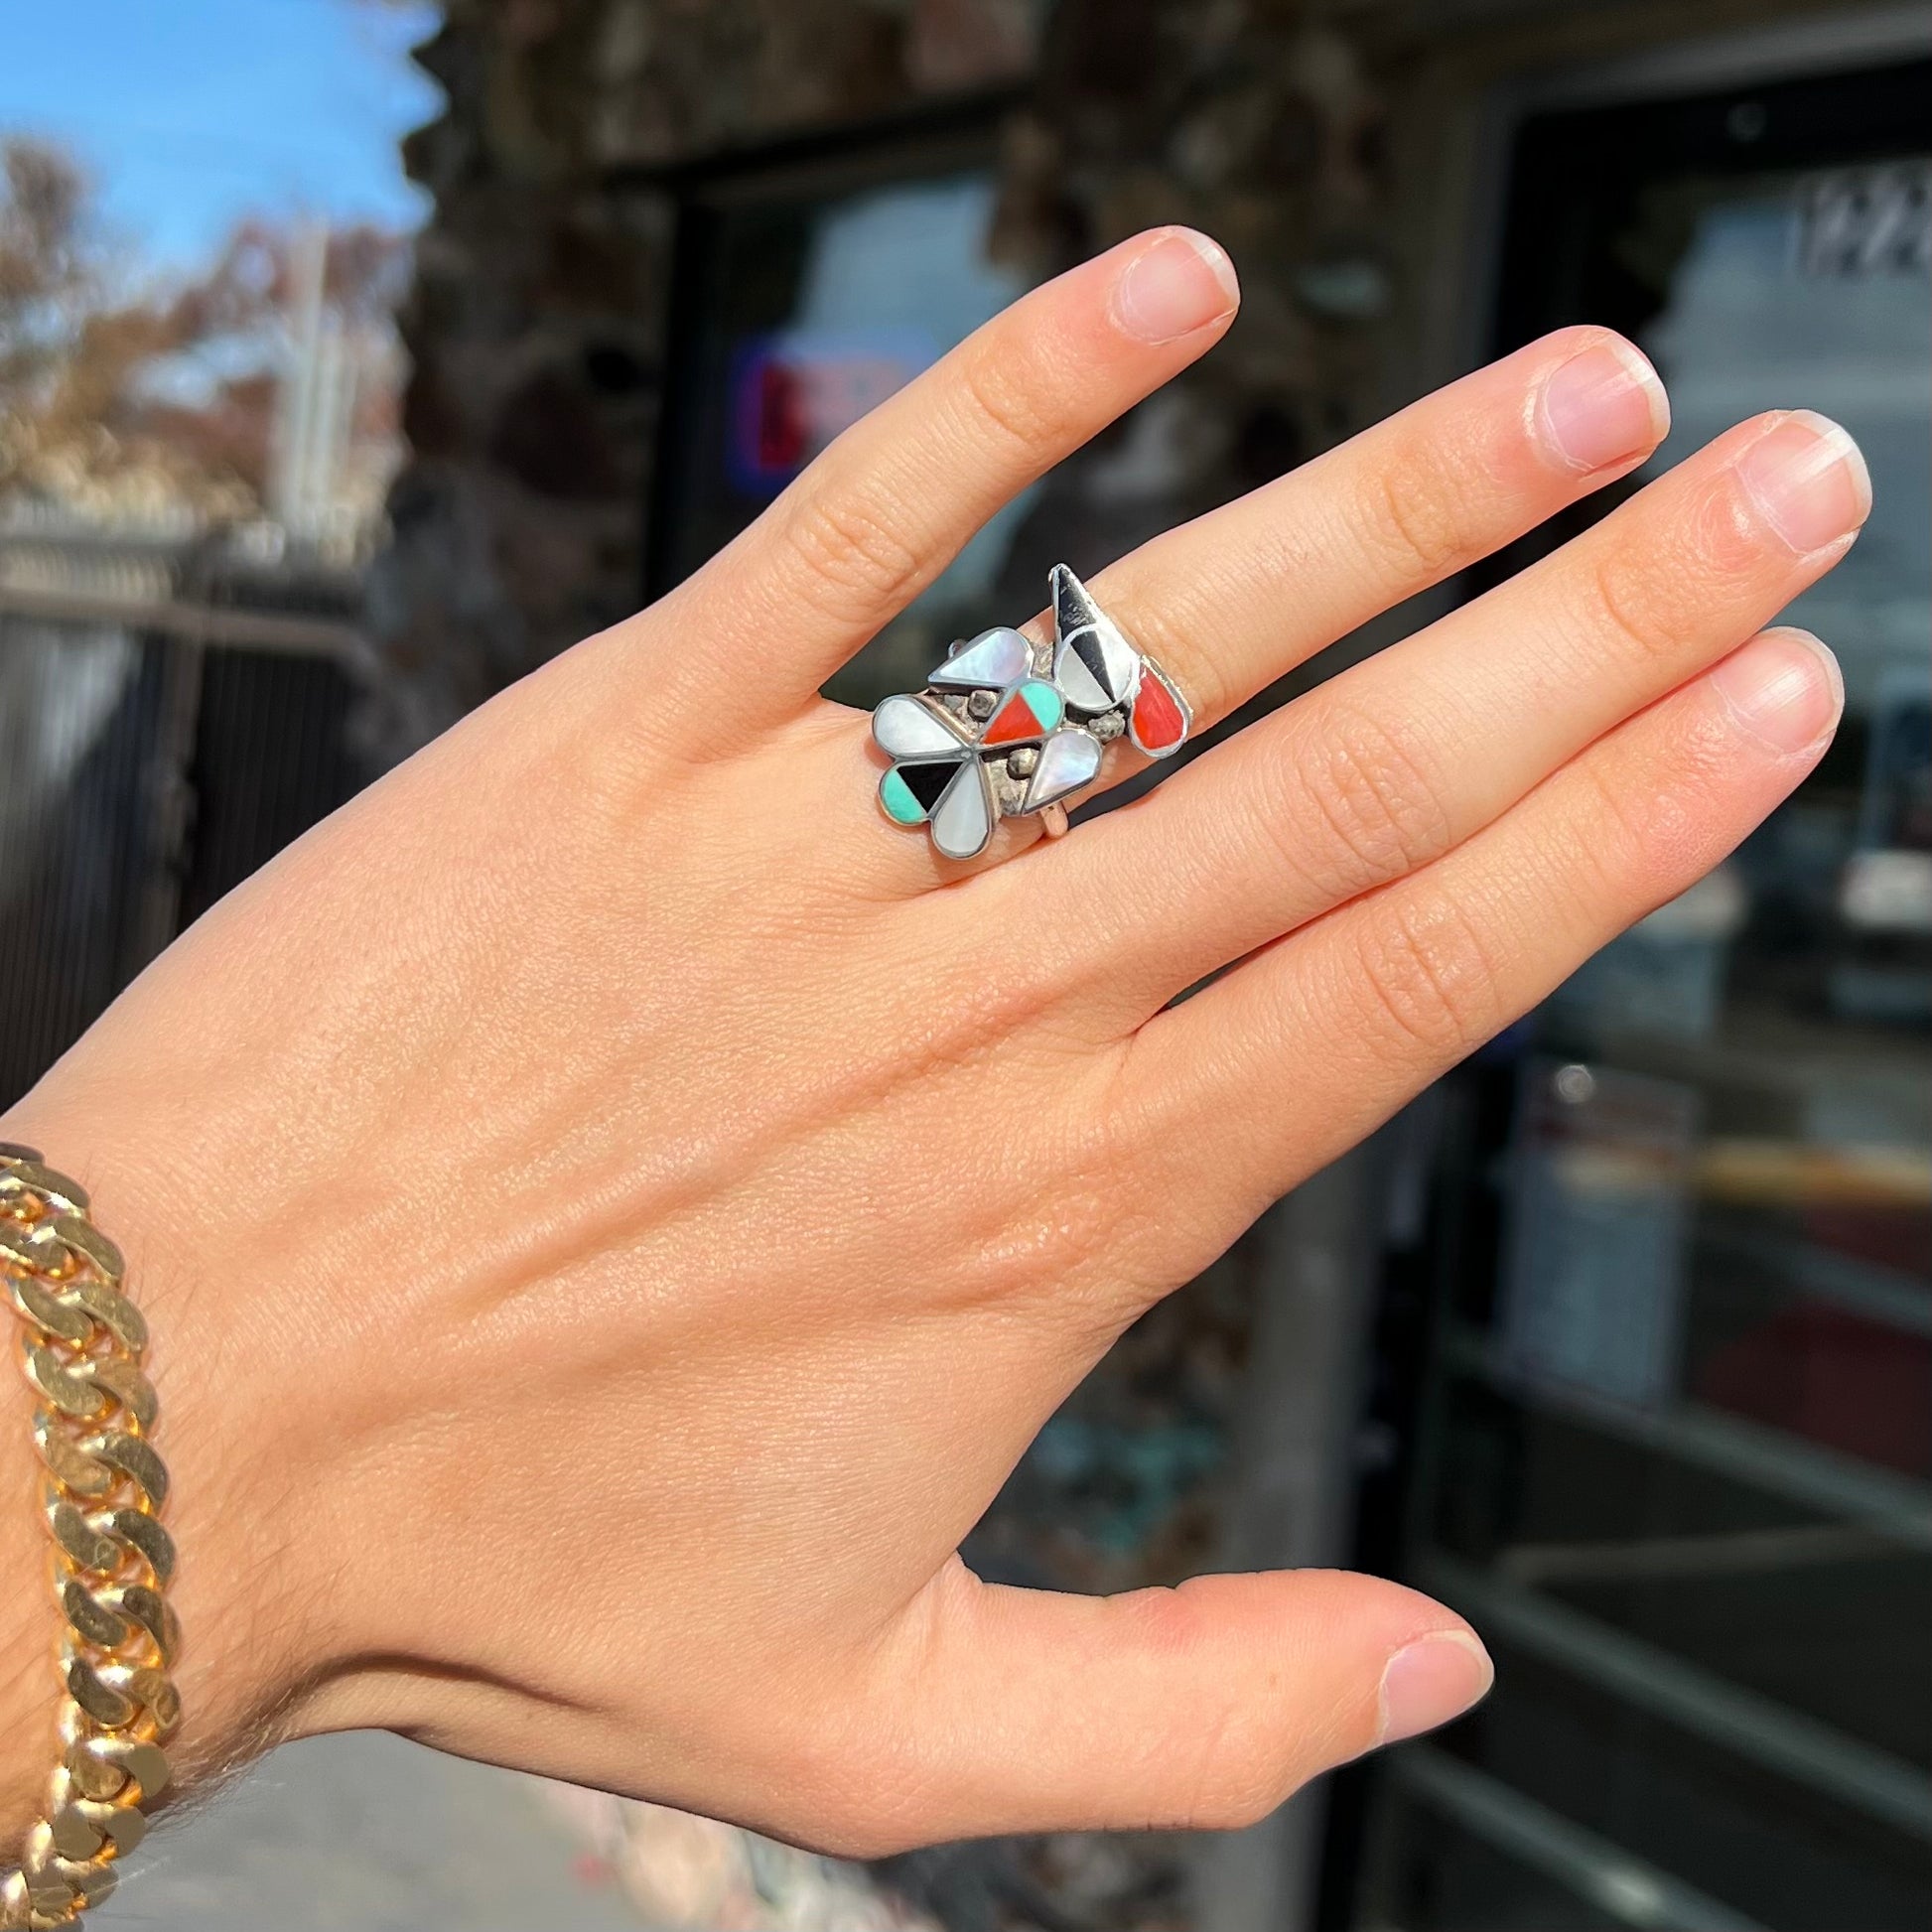 A vintage, sterling silver Zuni thunderbird ring inlaid with turquoise, mother of pearl, onyx, and coral stones.